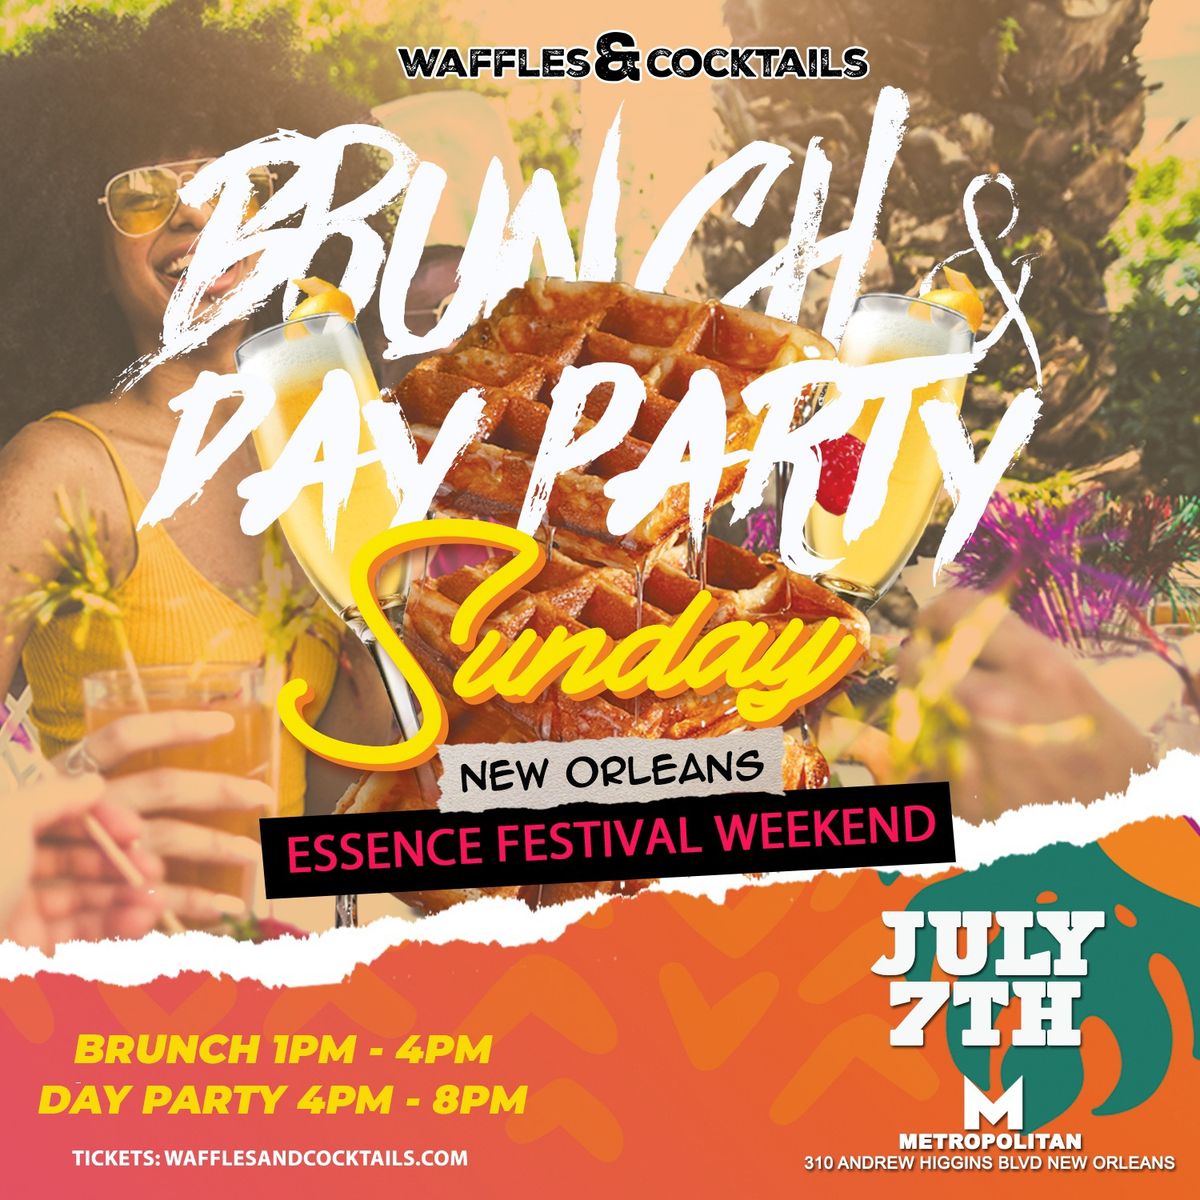 Waffles & Cocktails Essence Festival Edition (New Orleans)